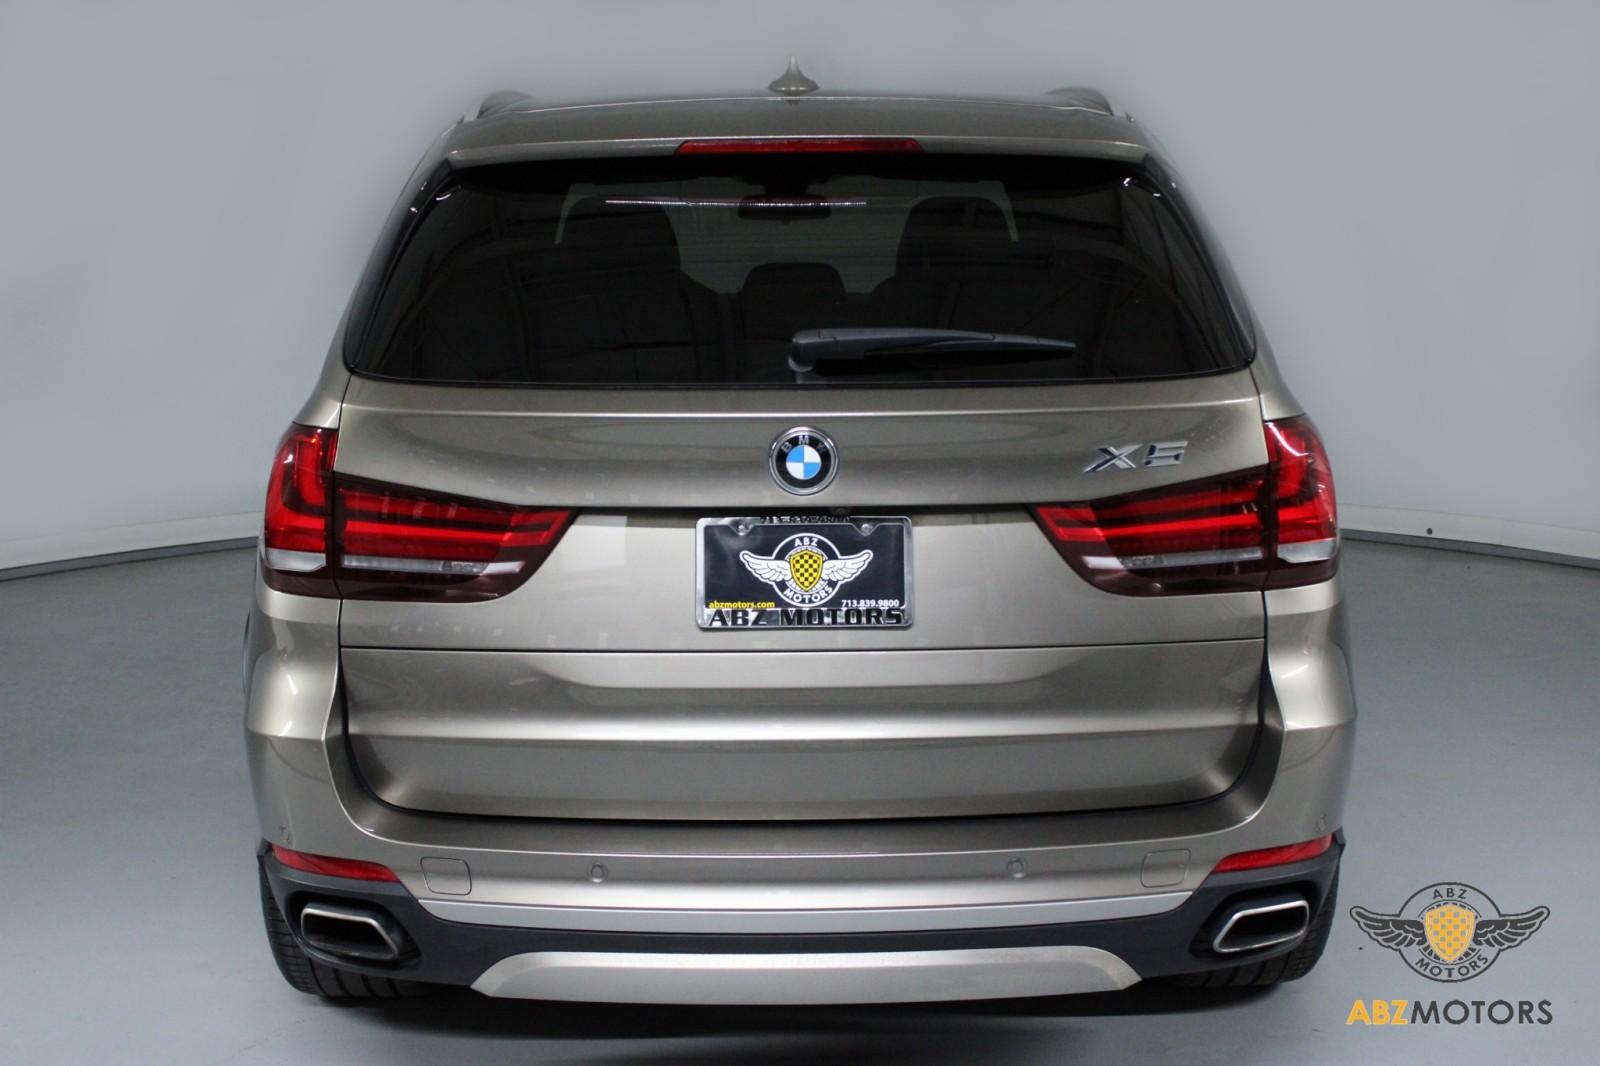 BMW X5 E53 REAR ROOF SPOILER BOOT / TRUNK / TAILGATE